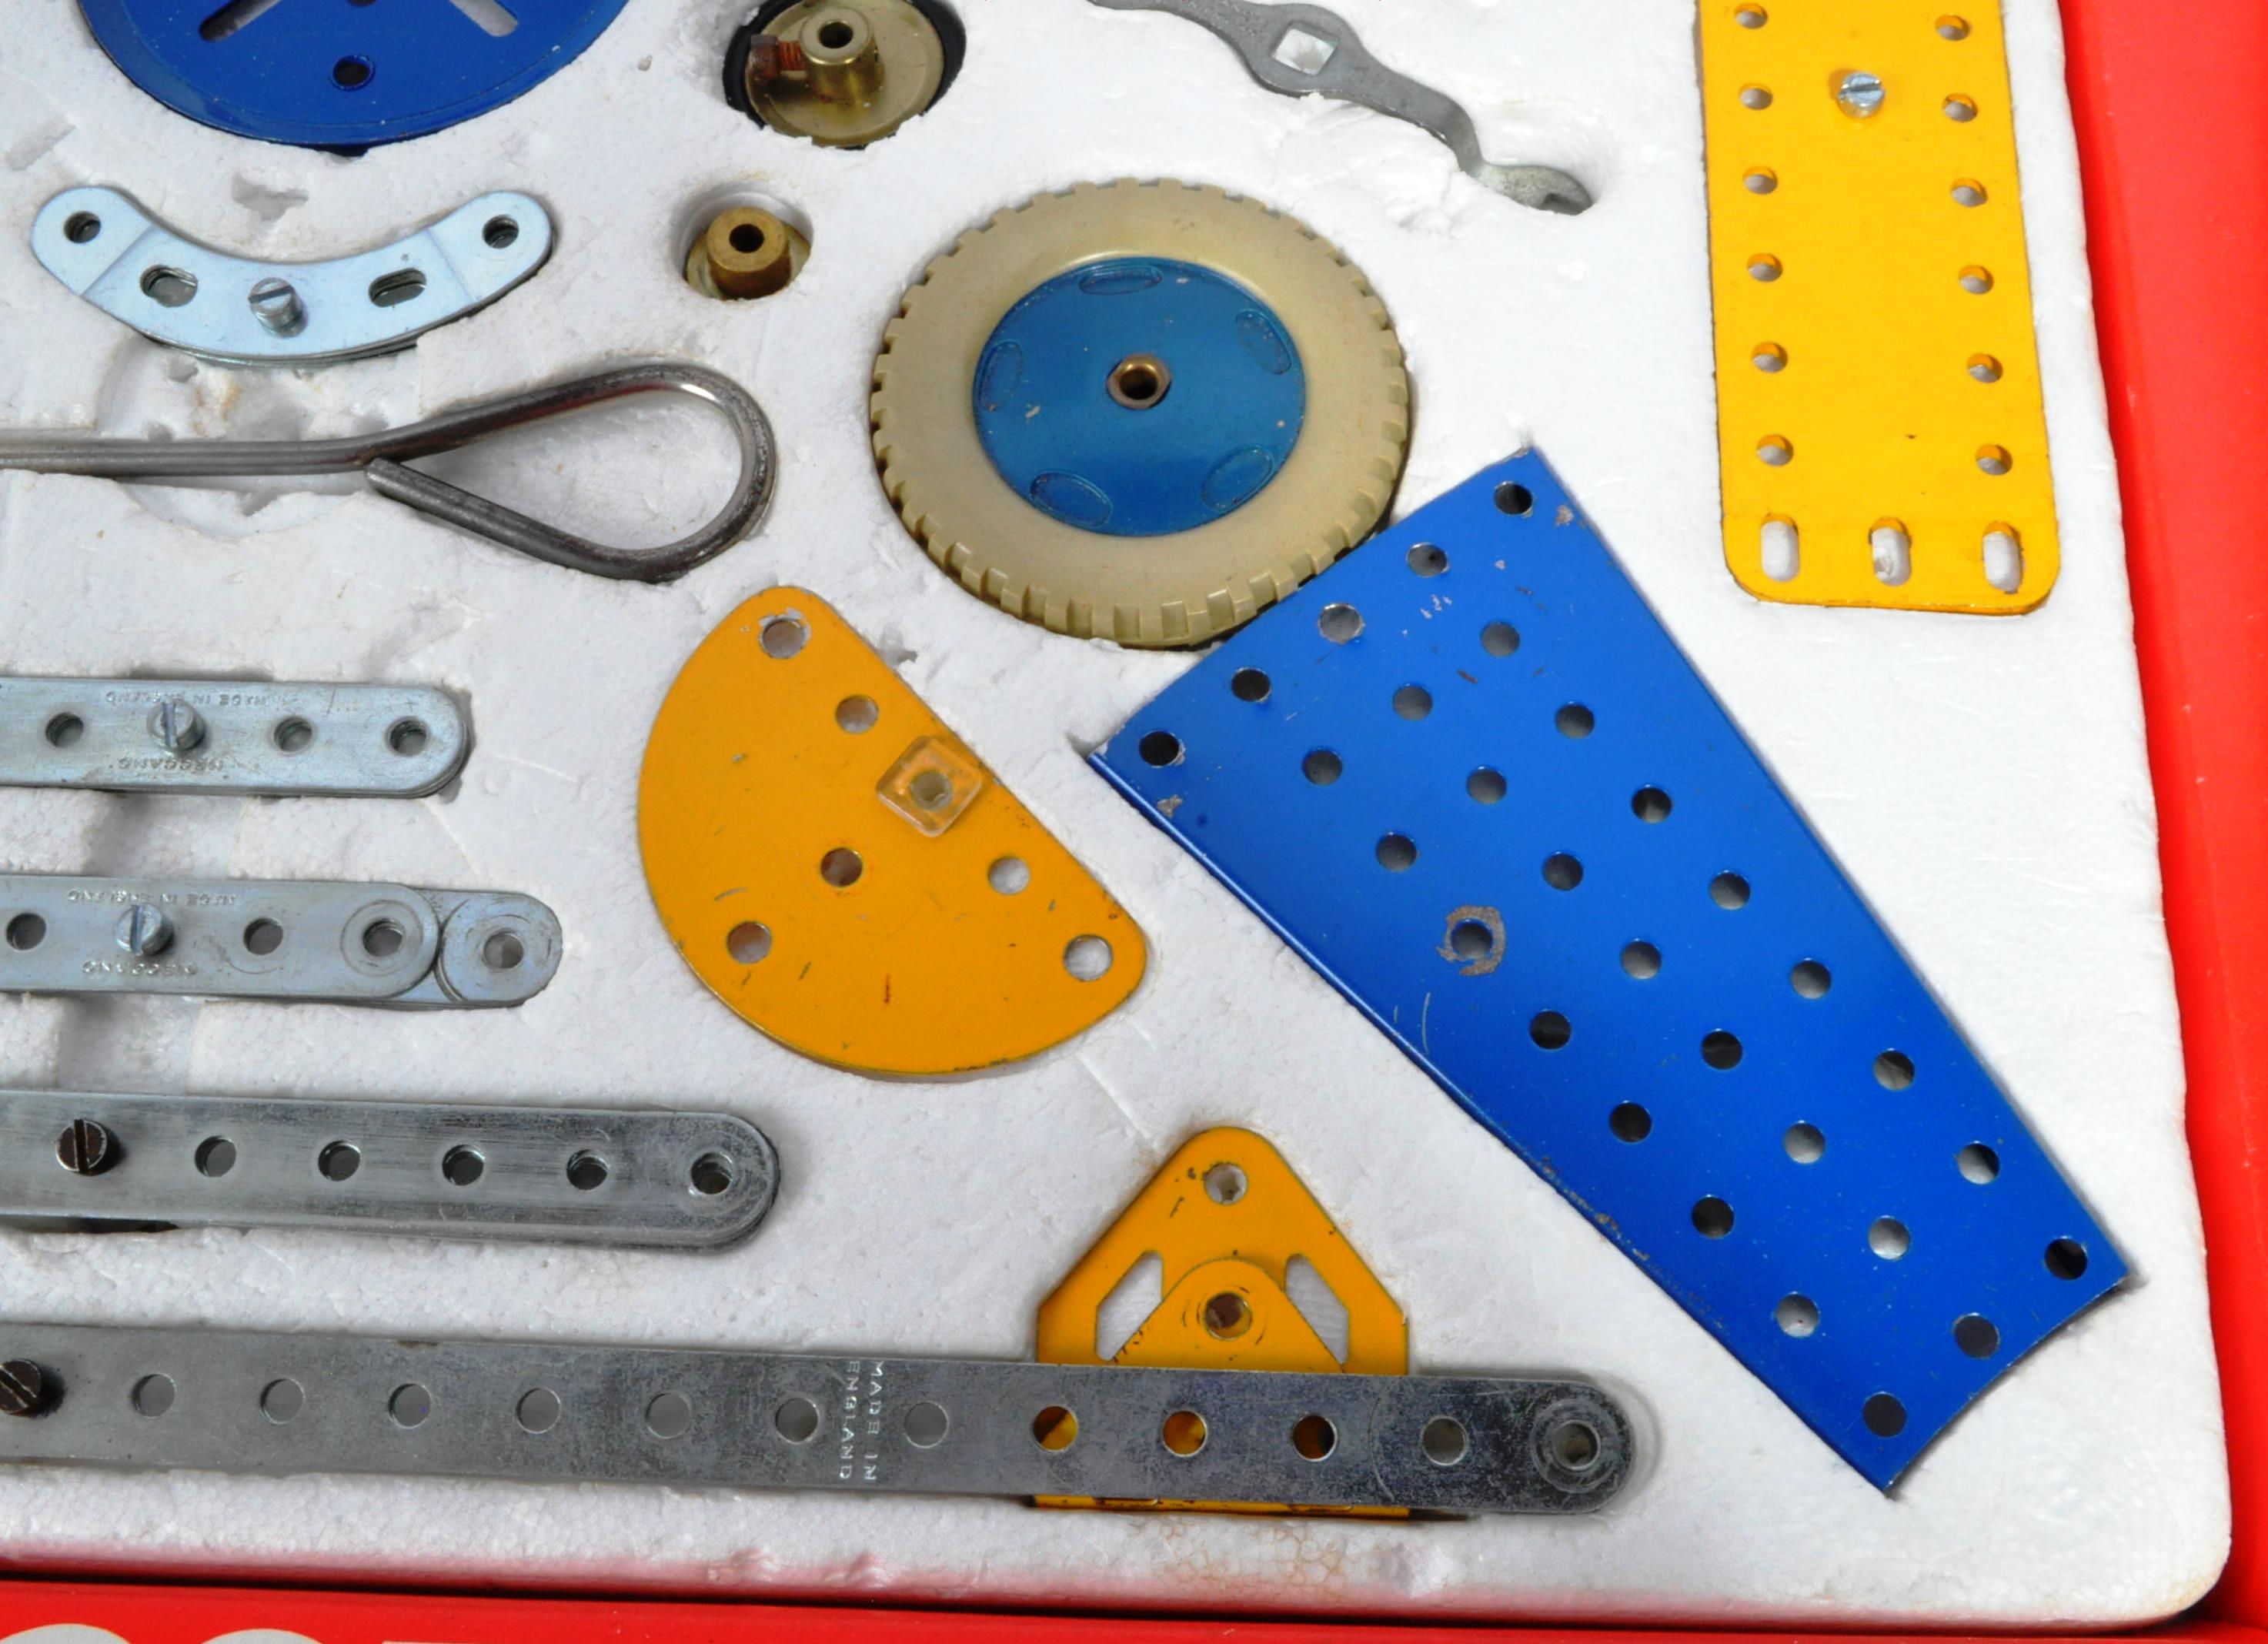 TWO VINTAGE MECCANO CONSTRUCTOR SETS - Image 11 of 12